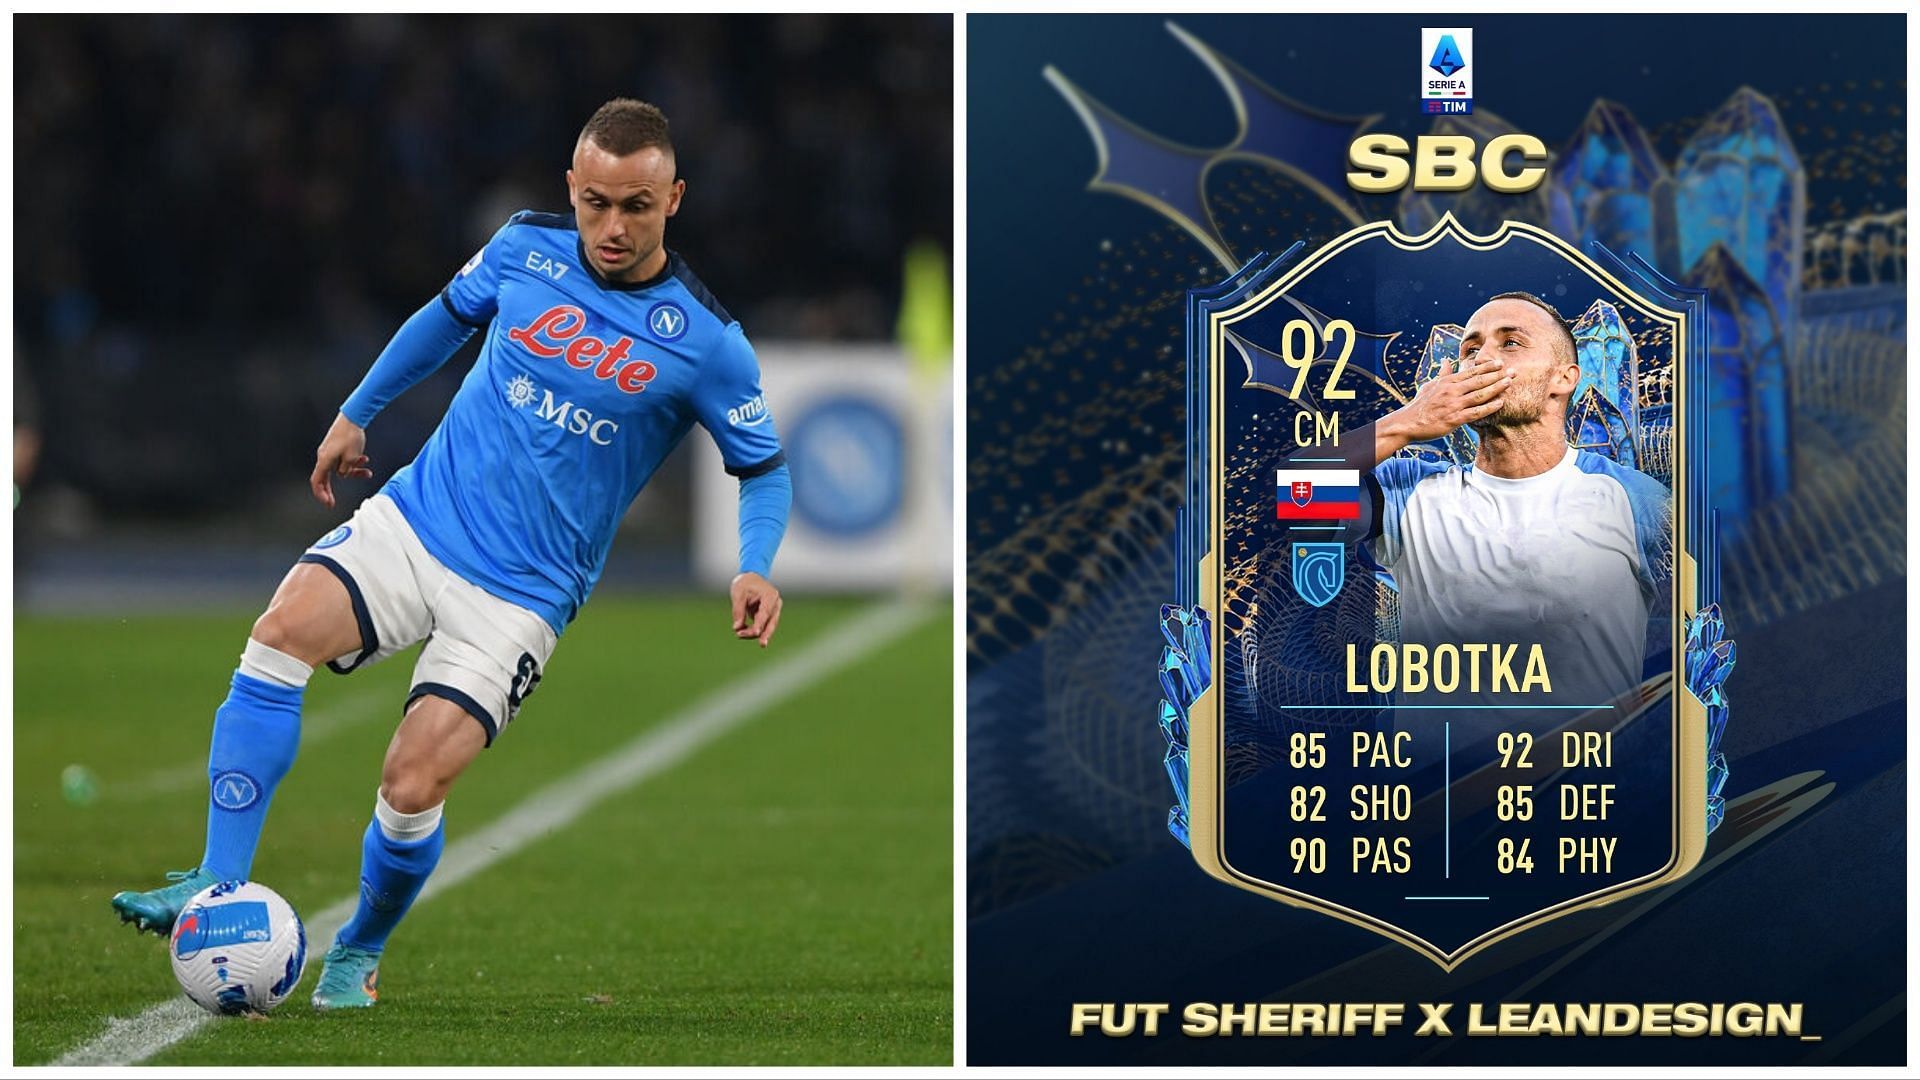 TOTS Lobotka has been leaked (Images via Getty and Twitter/FUT Sheriff)